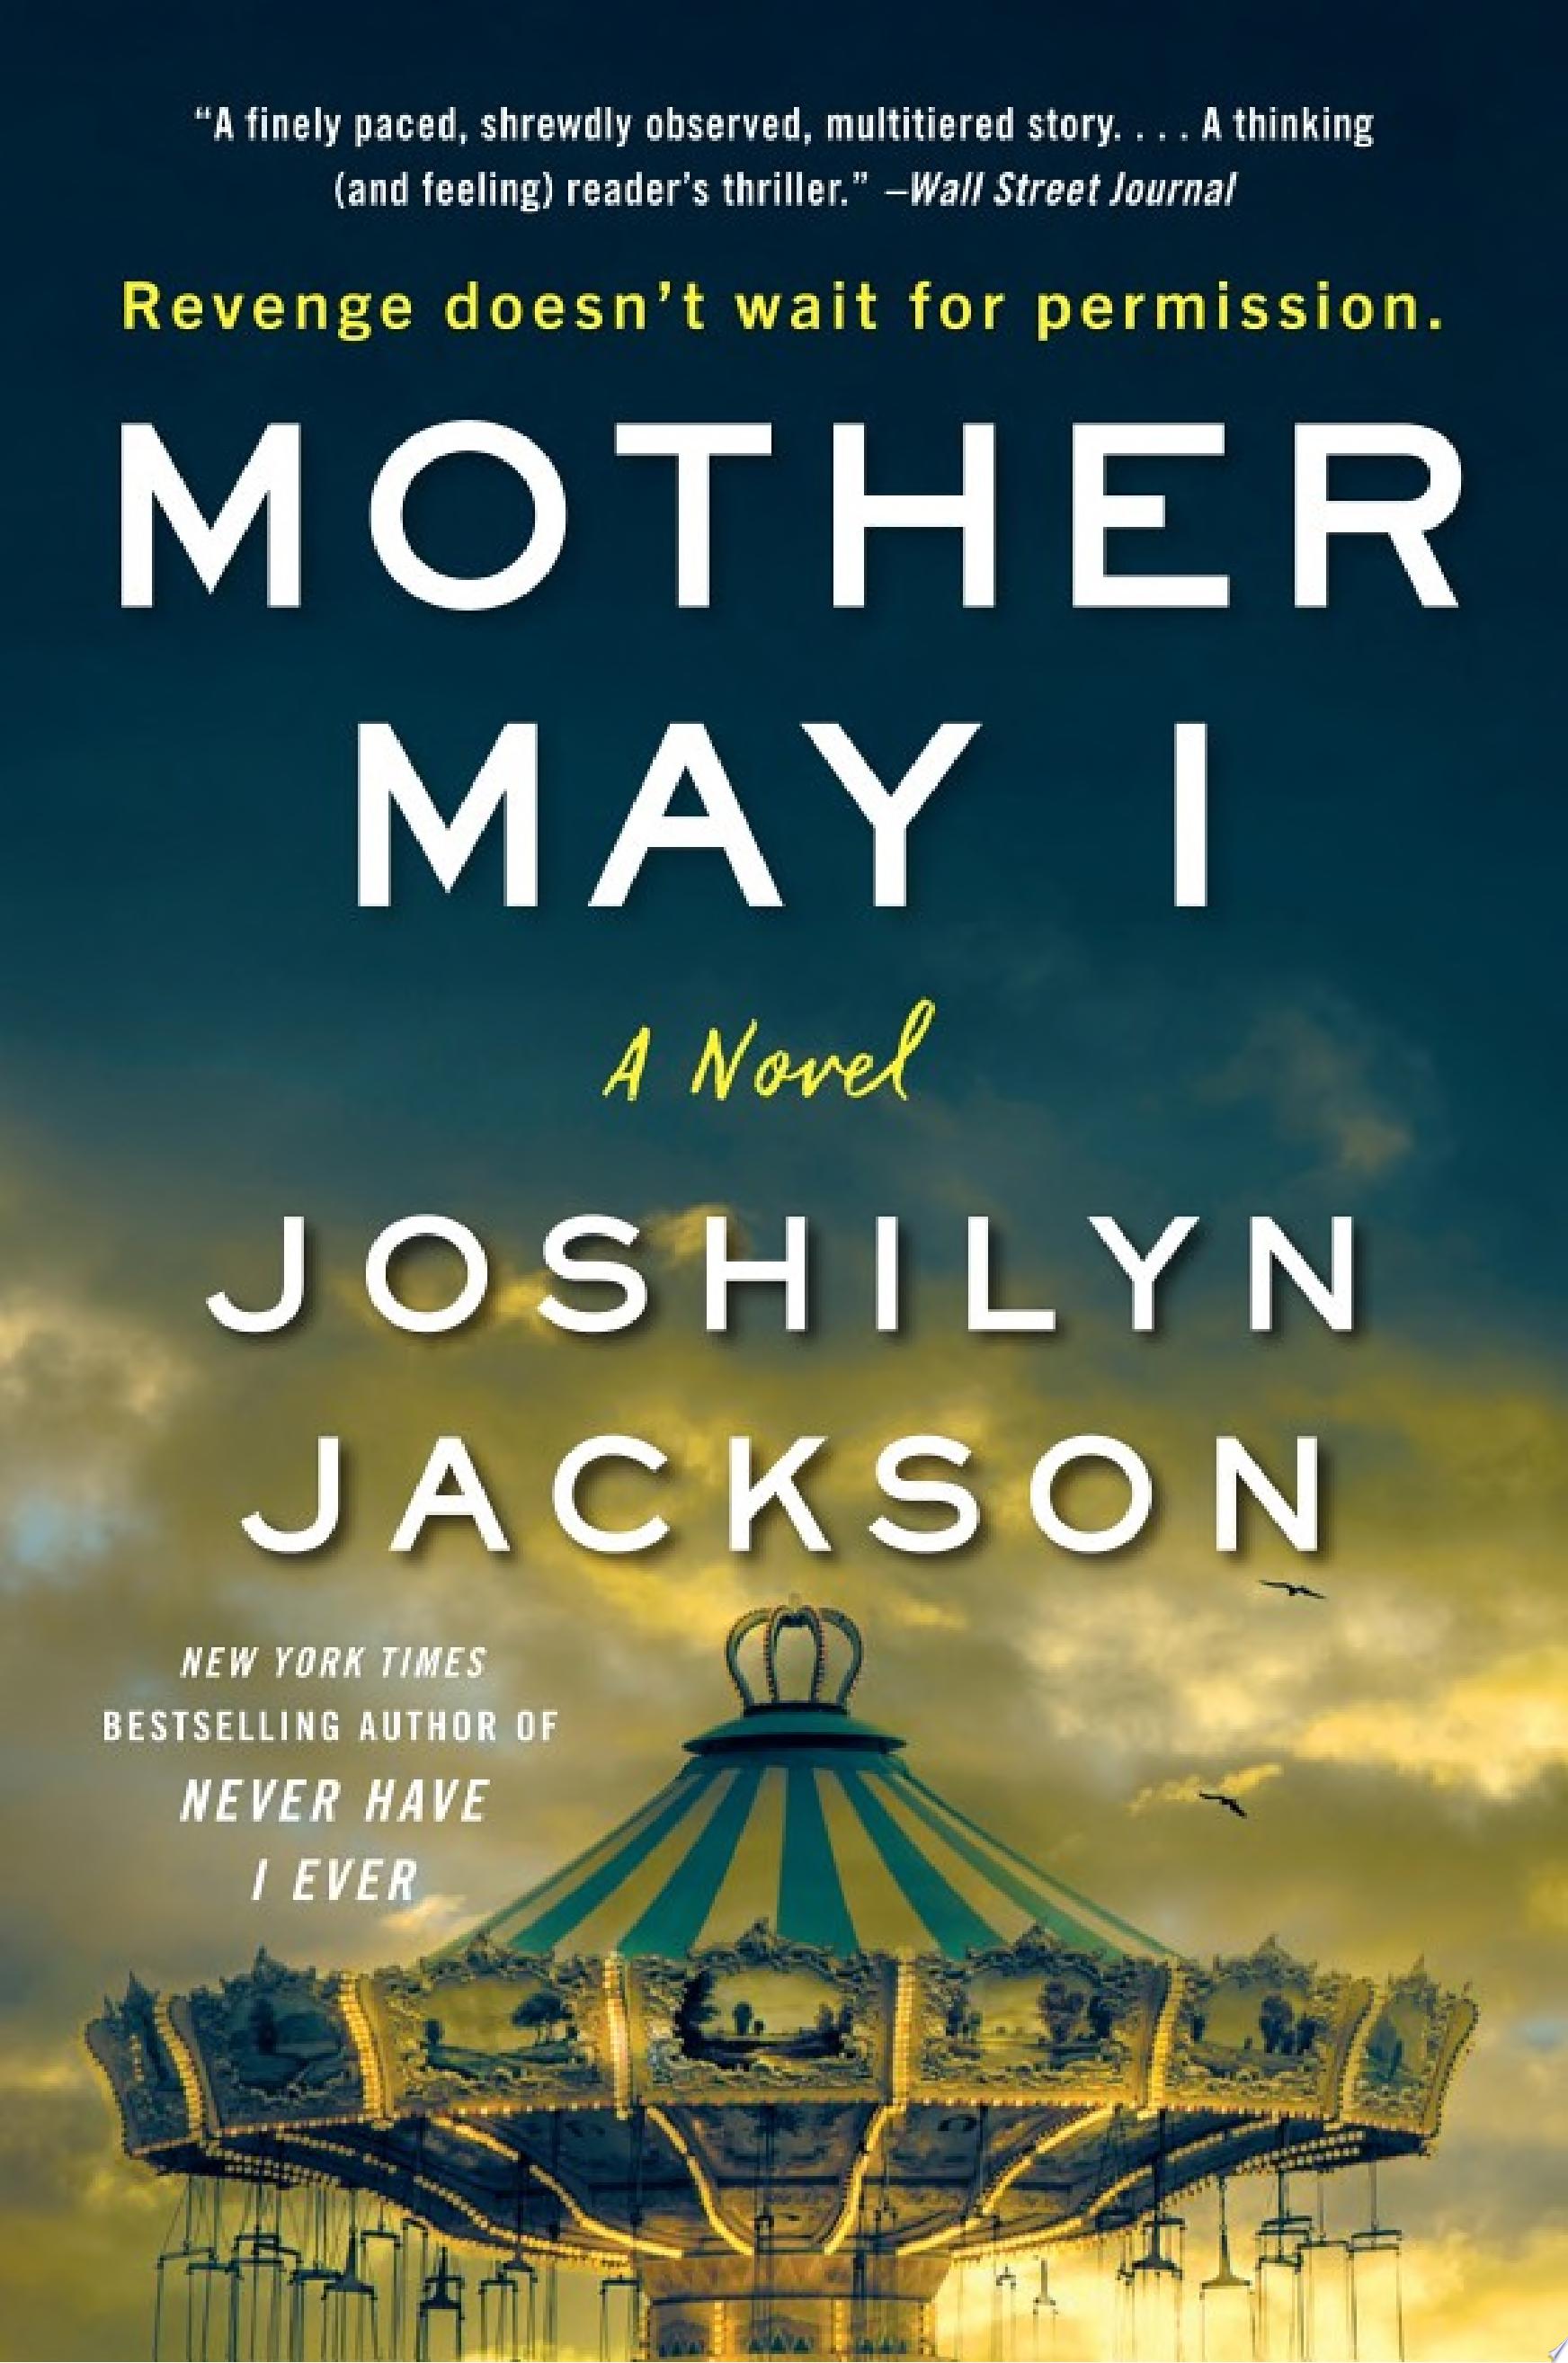 Image for "Mother May I"